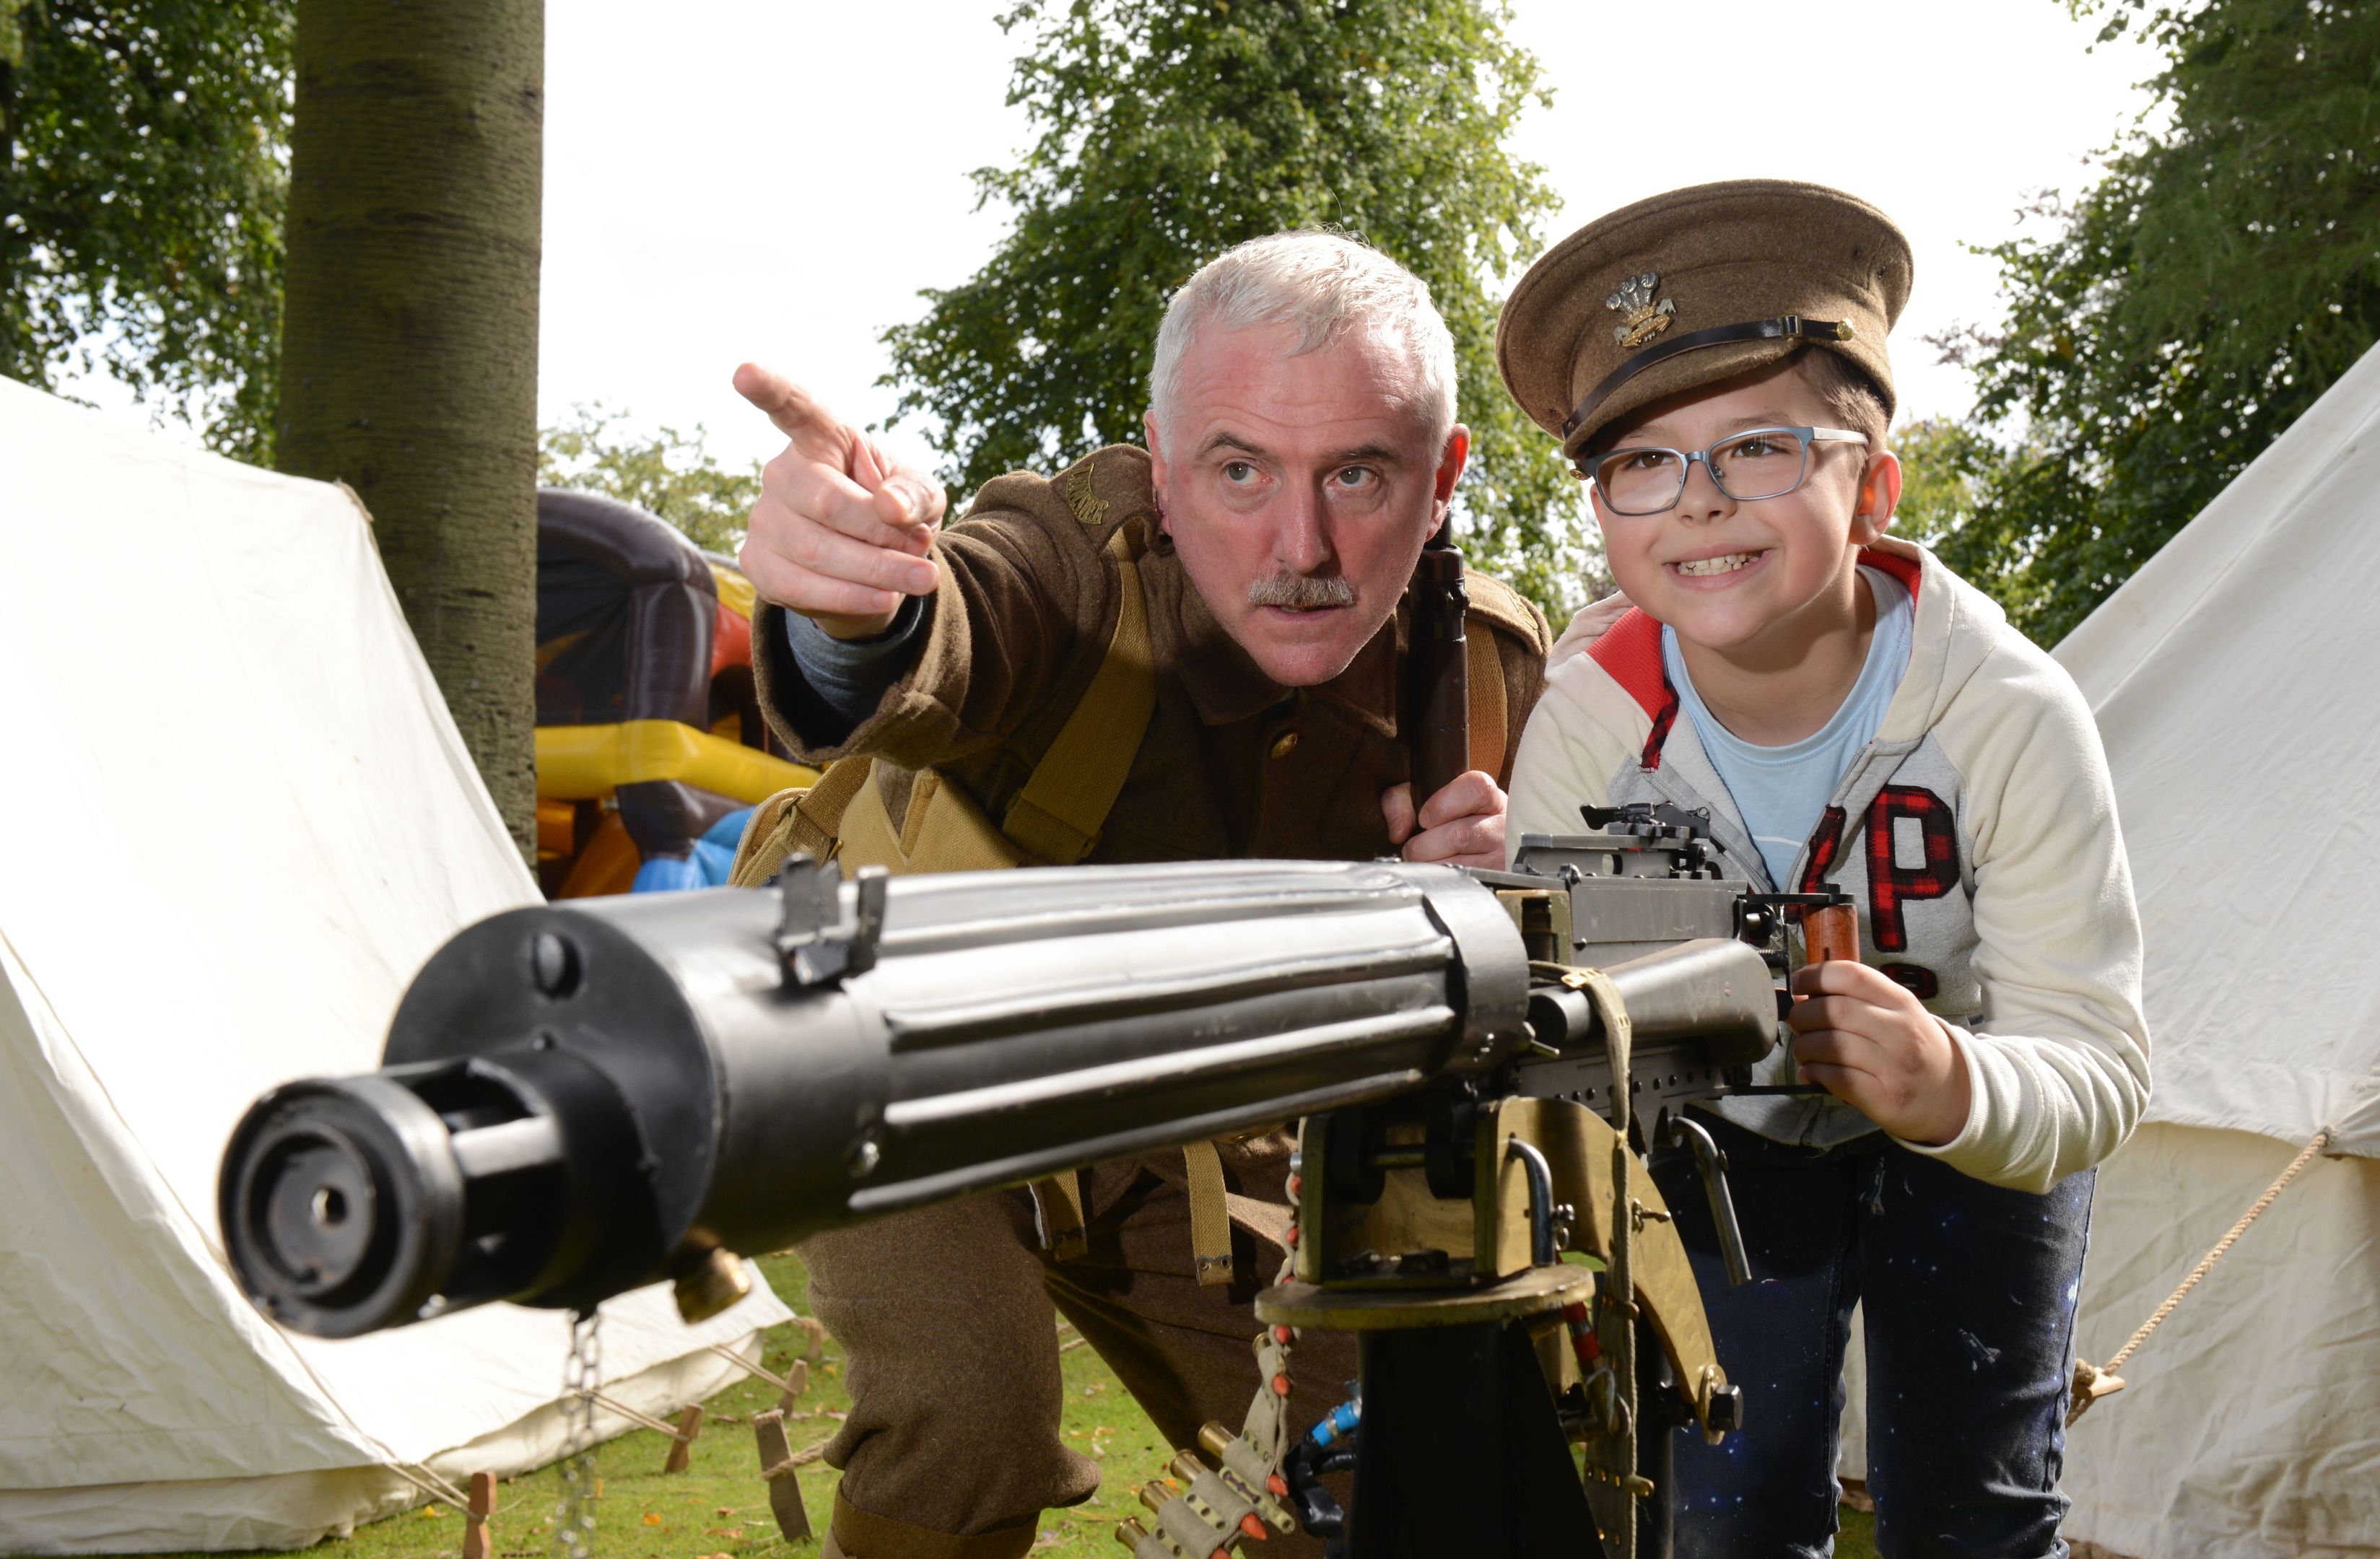 Prince of Wales Leinster Regiment's Ambrose Sharpe shows young recruit Michael Kwecka aged 8, the way to battle